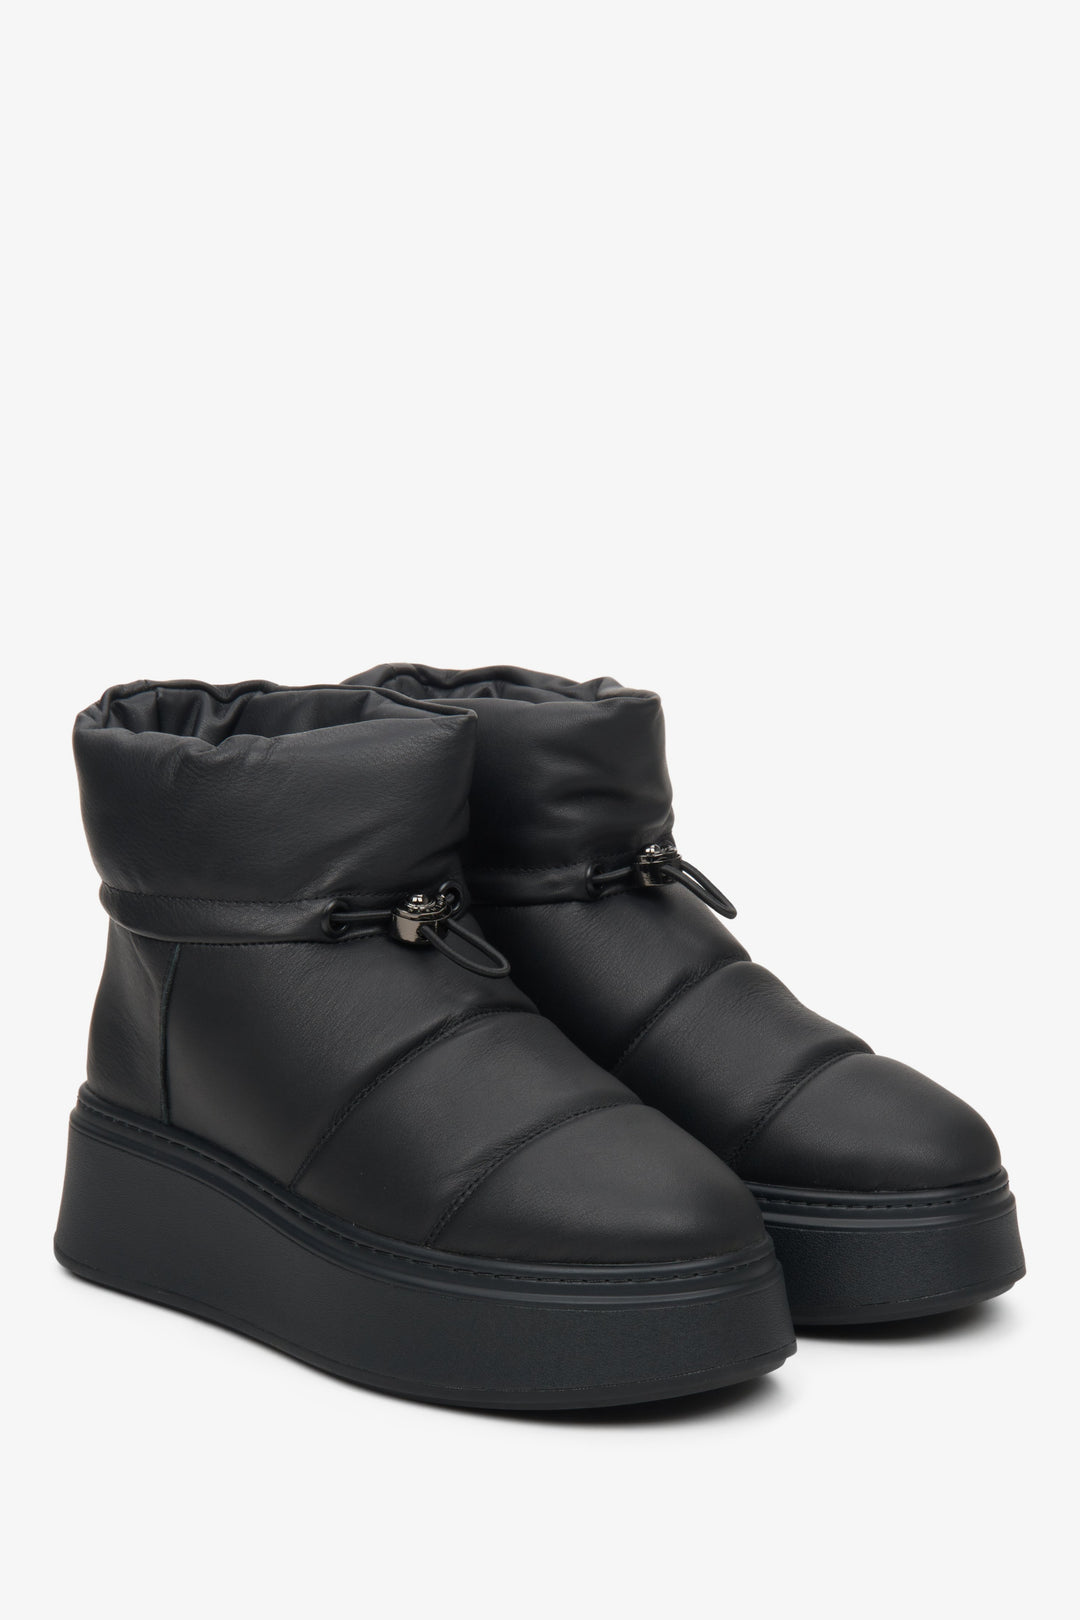 Winter women's snow boots made of genuine leather with a cuff by Estro - presentation of the toe and side seam.